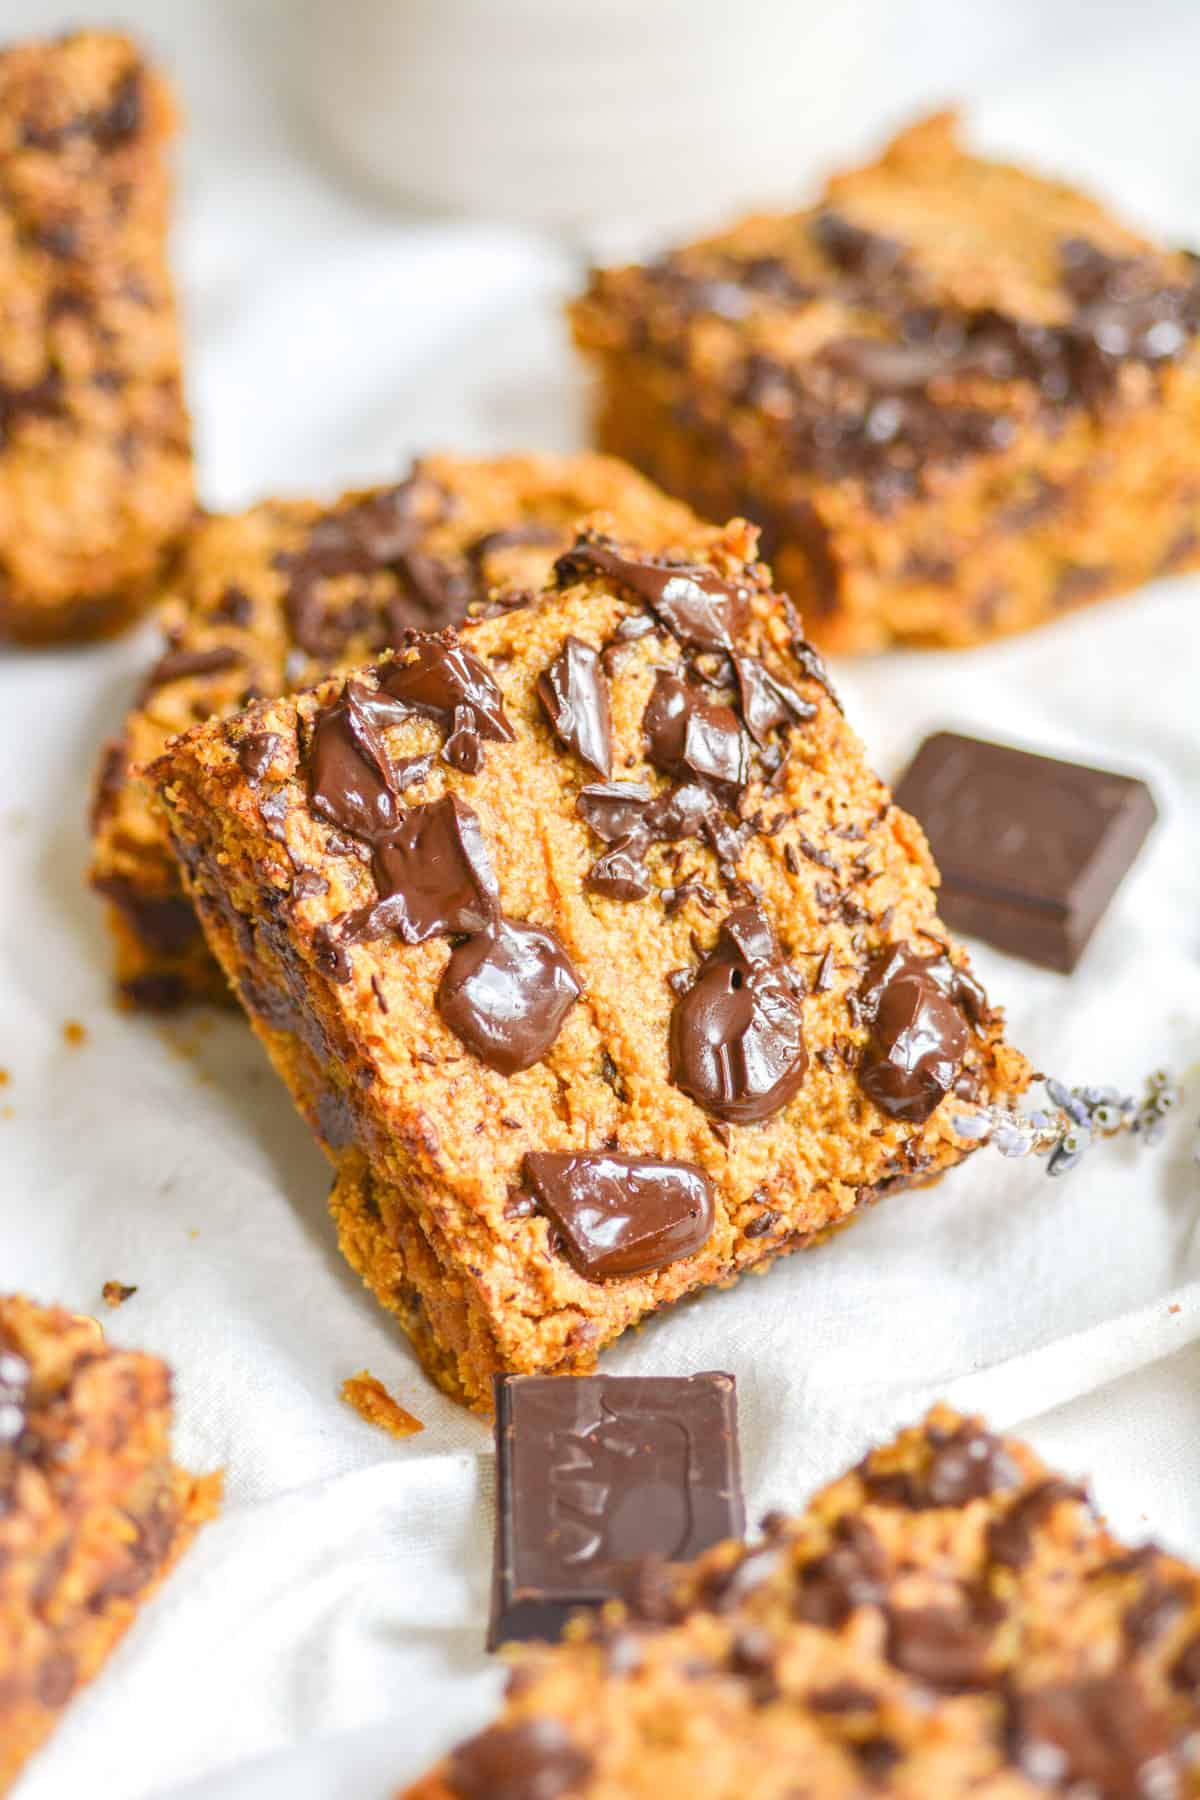 cashew butter blondies leaning on another blondie on a white cloth with squares of chocolate in the scene.